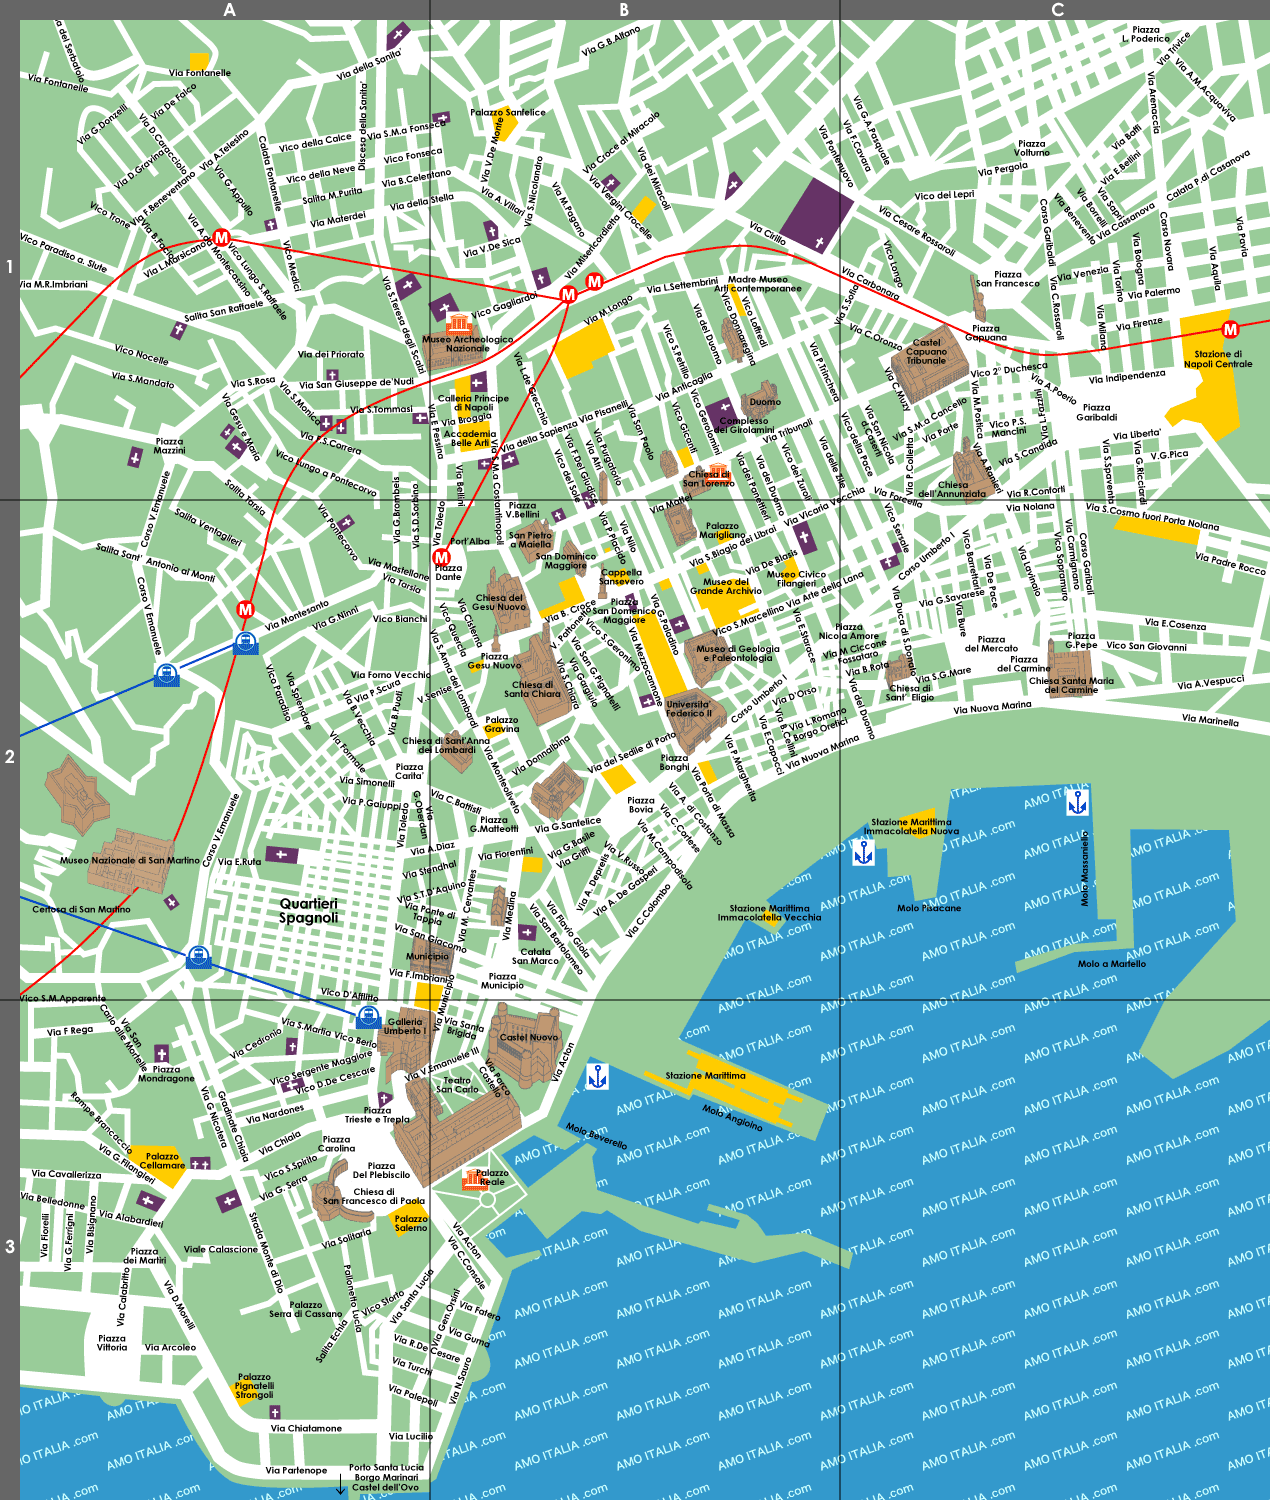 naples-map-travel-guide-amoitaly